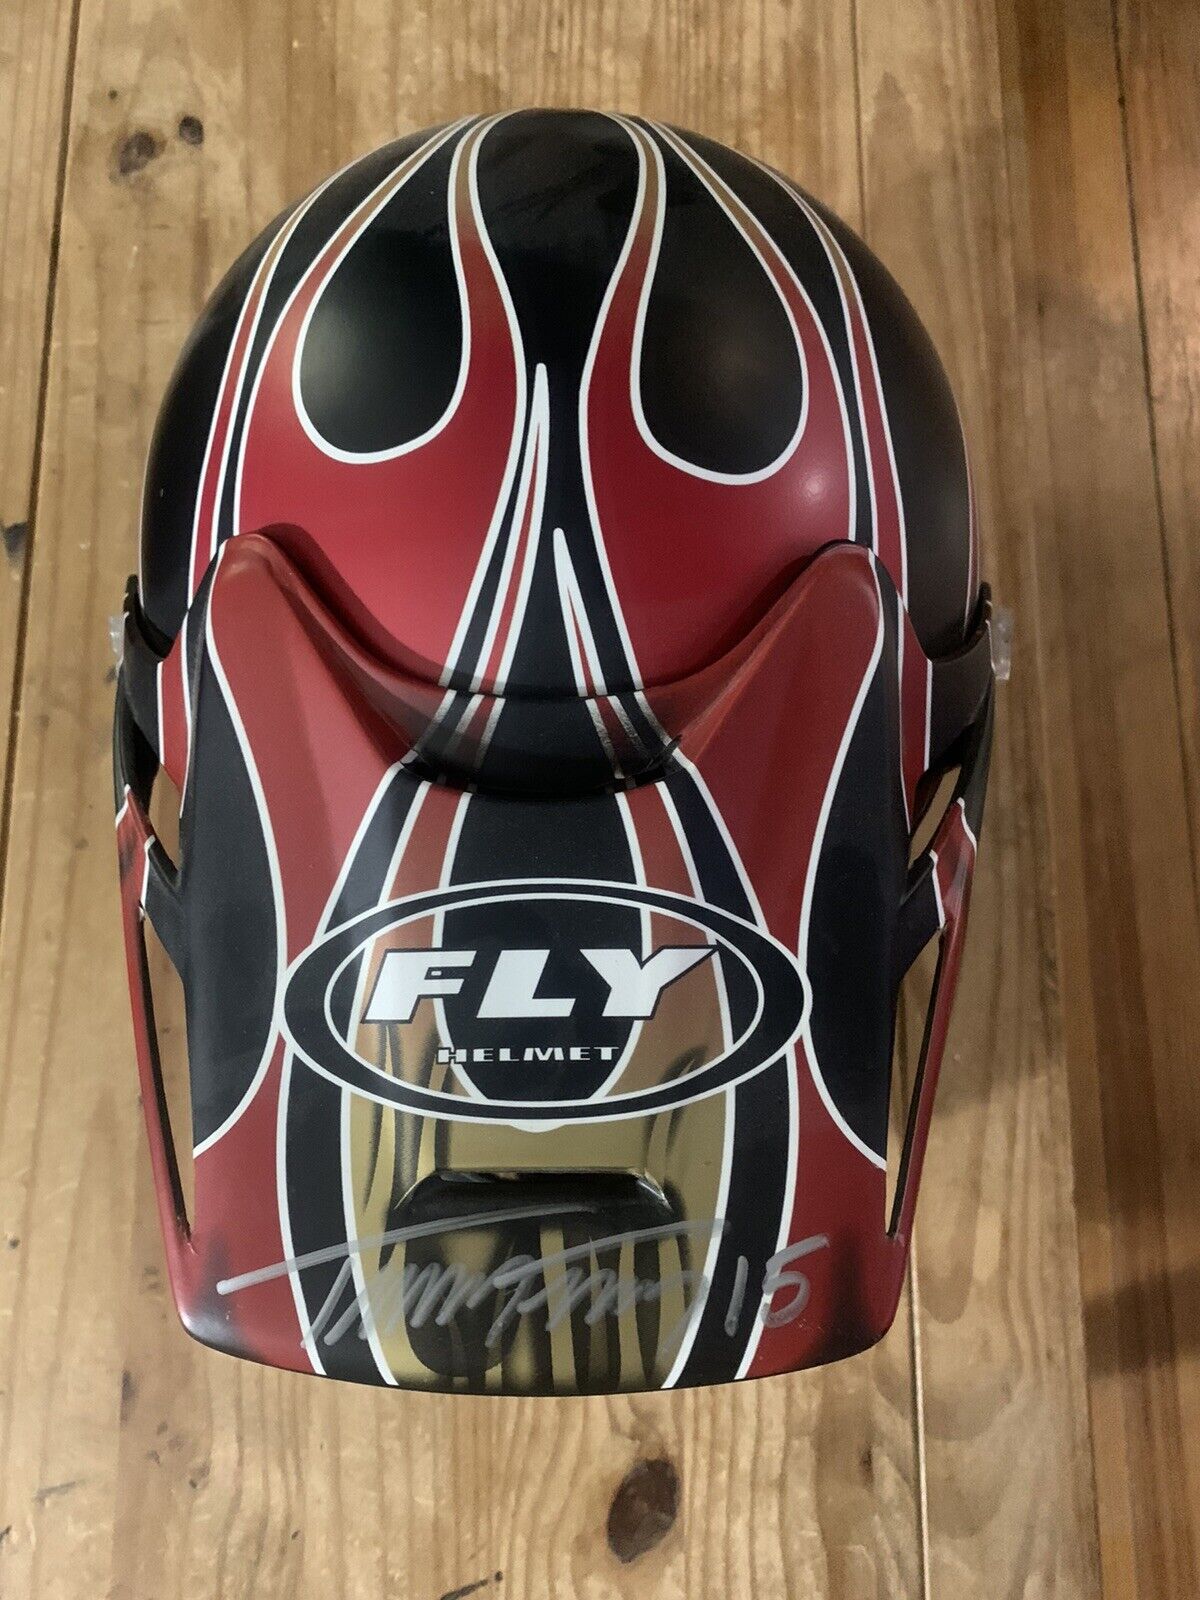 Tim Ferry Autographed Fly racing helmet 